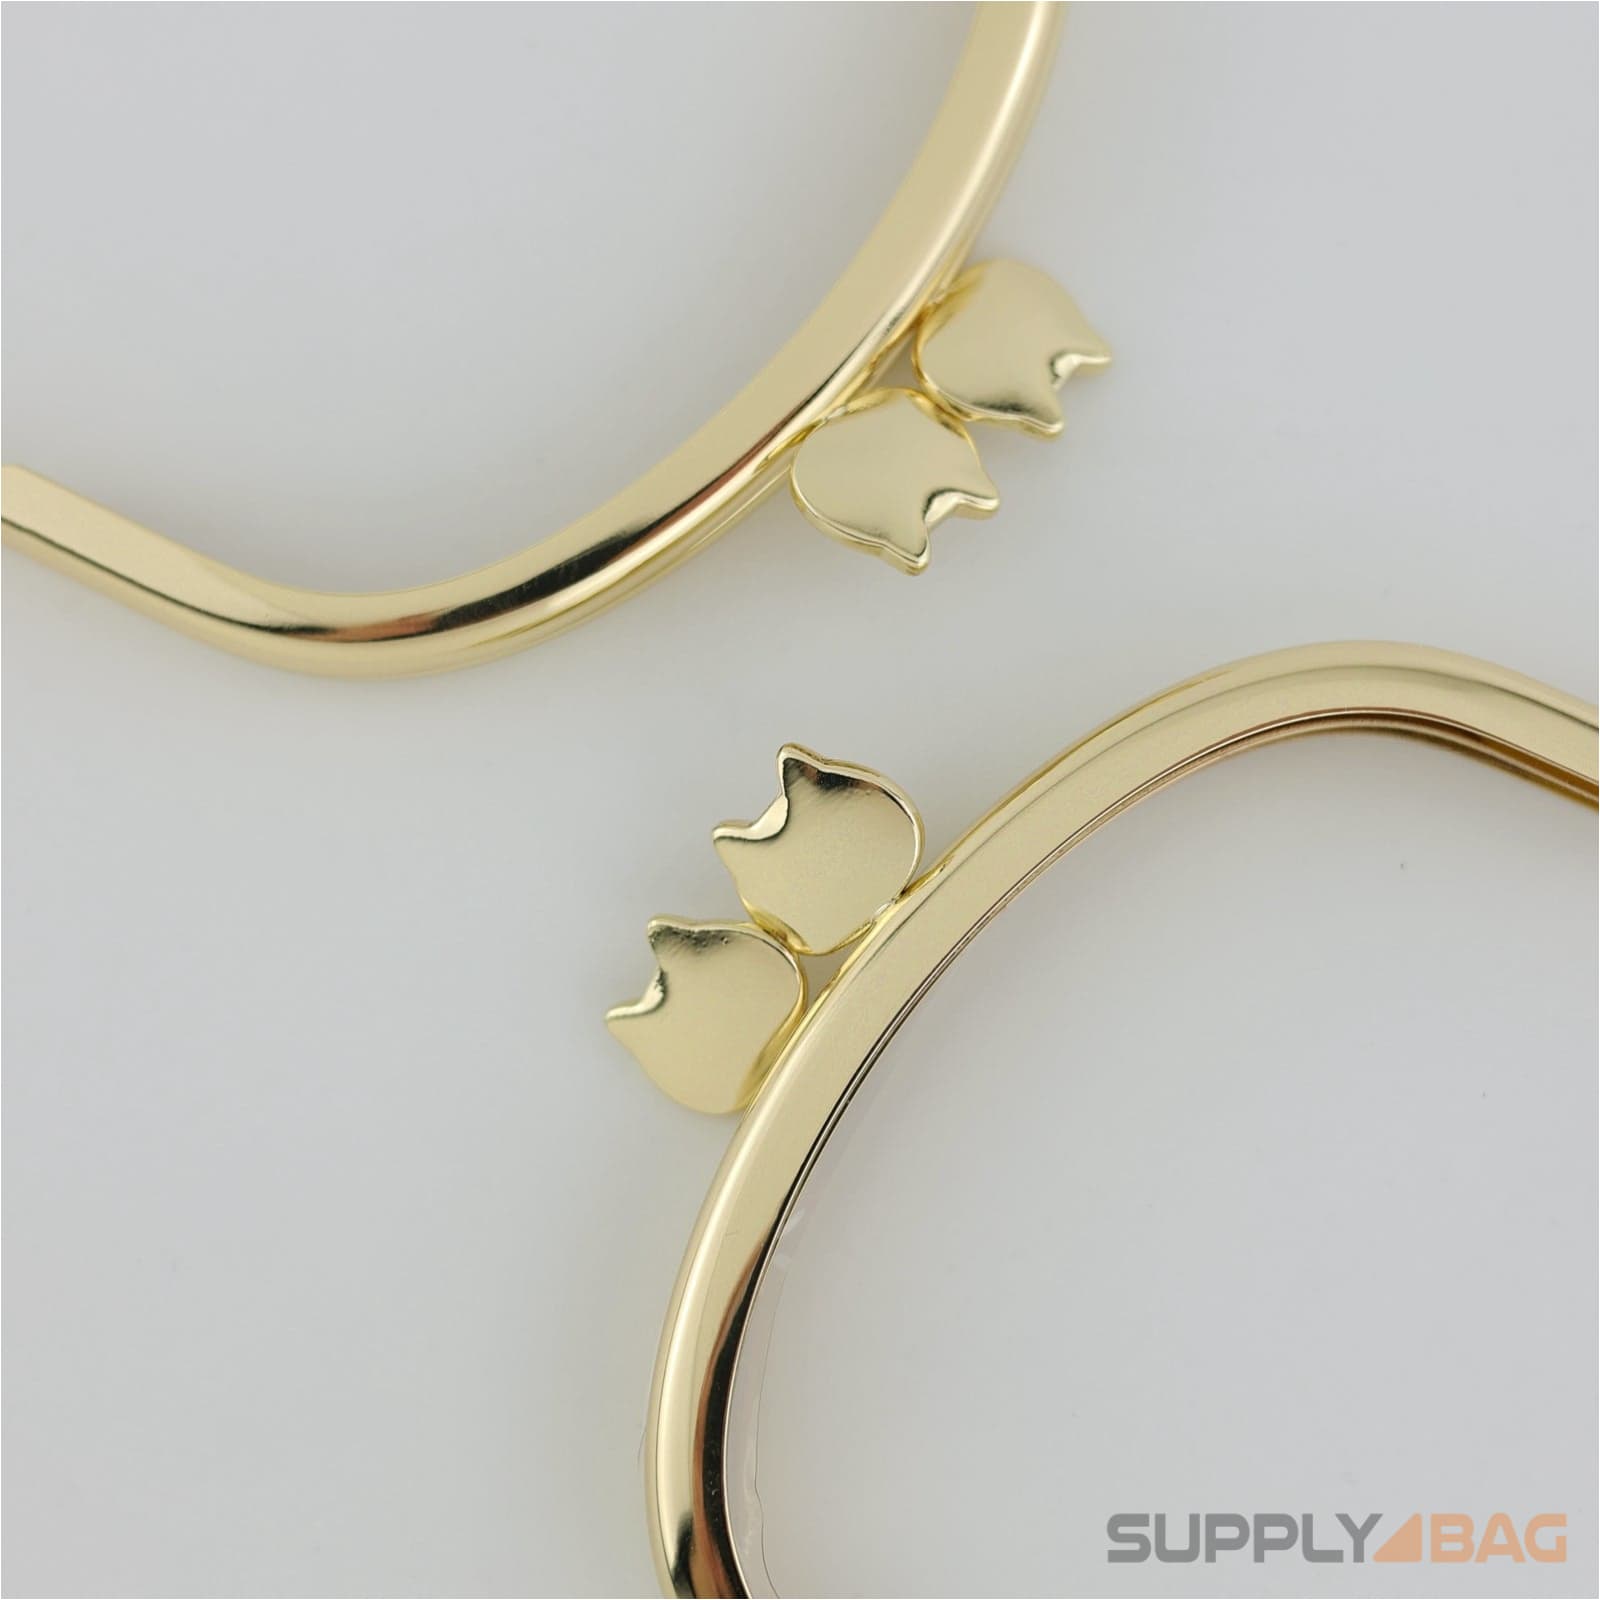 4 x 2 inch - cat clasp - gold arched shape purse frame